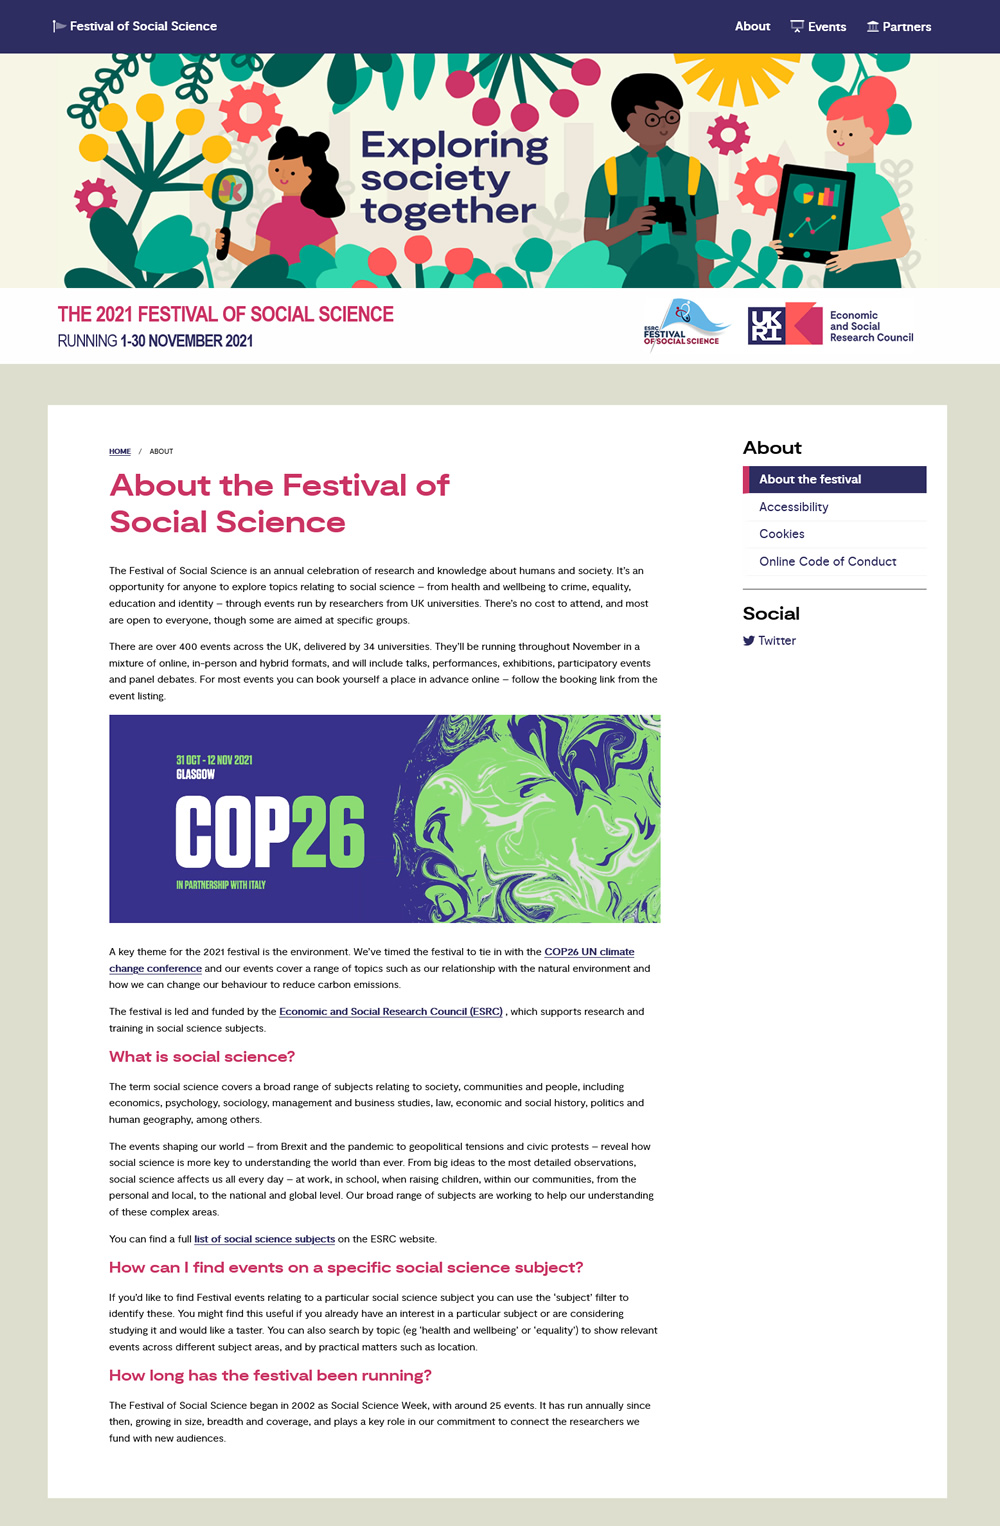 Festival of Social Science 2021 About page